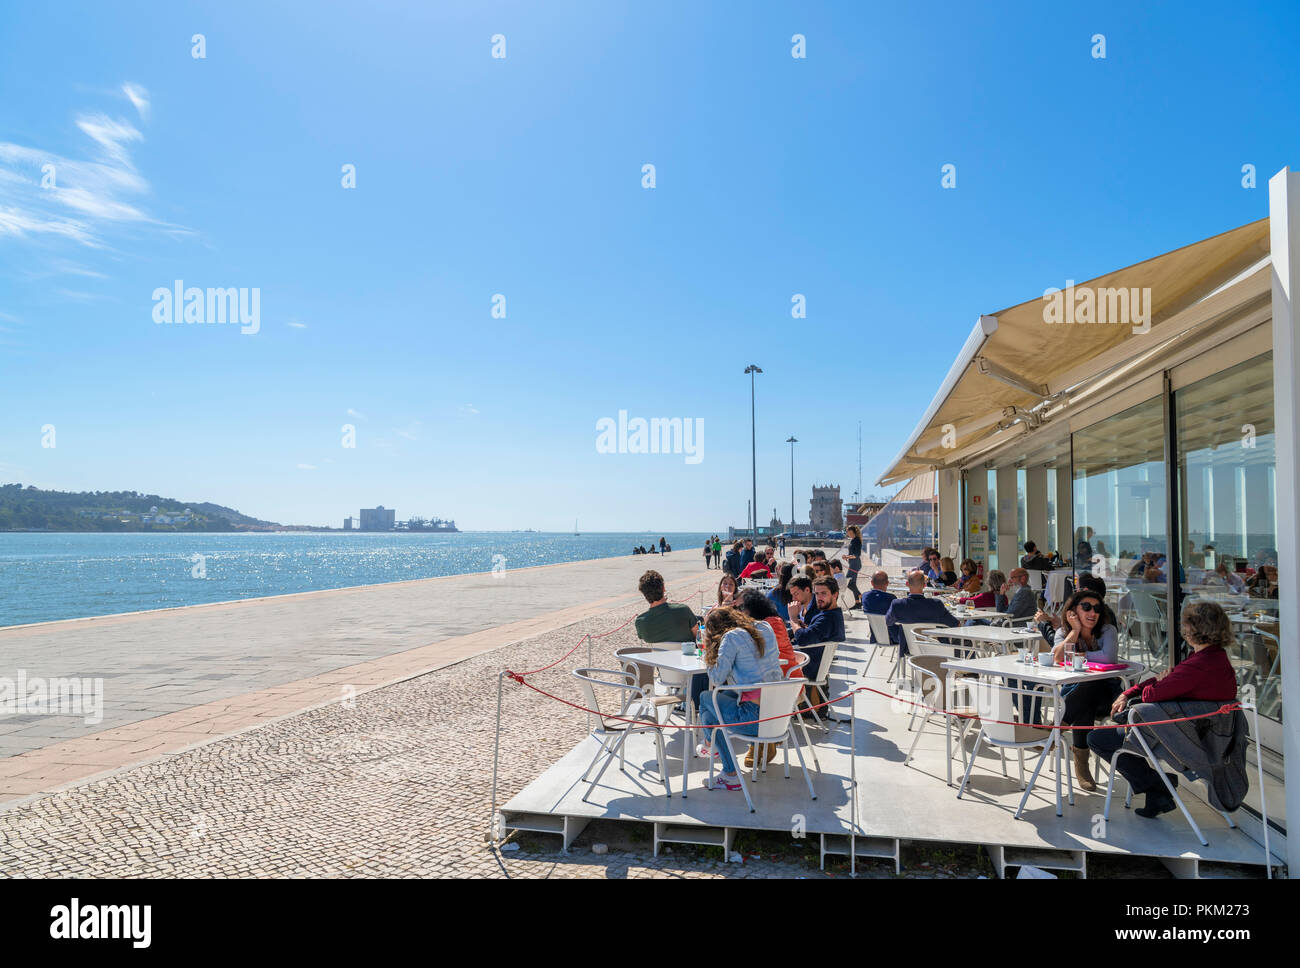 Waterfront restaurant looking towards the Belem Tower, Belem district, Lisbon, Portugal Stock Photo